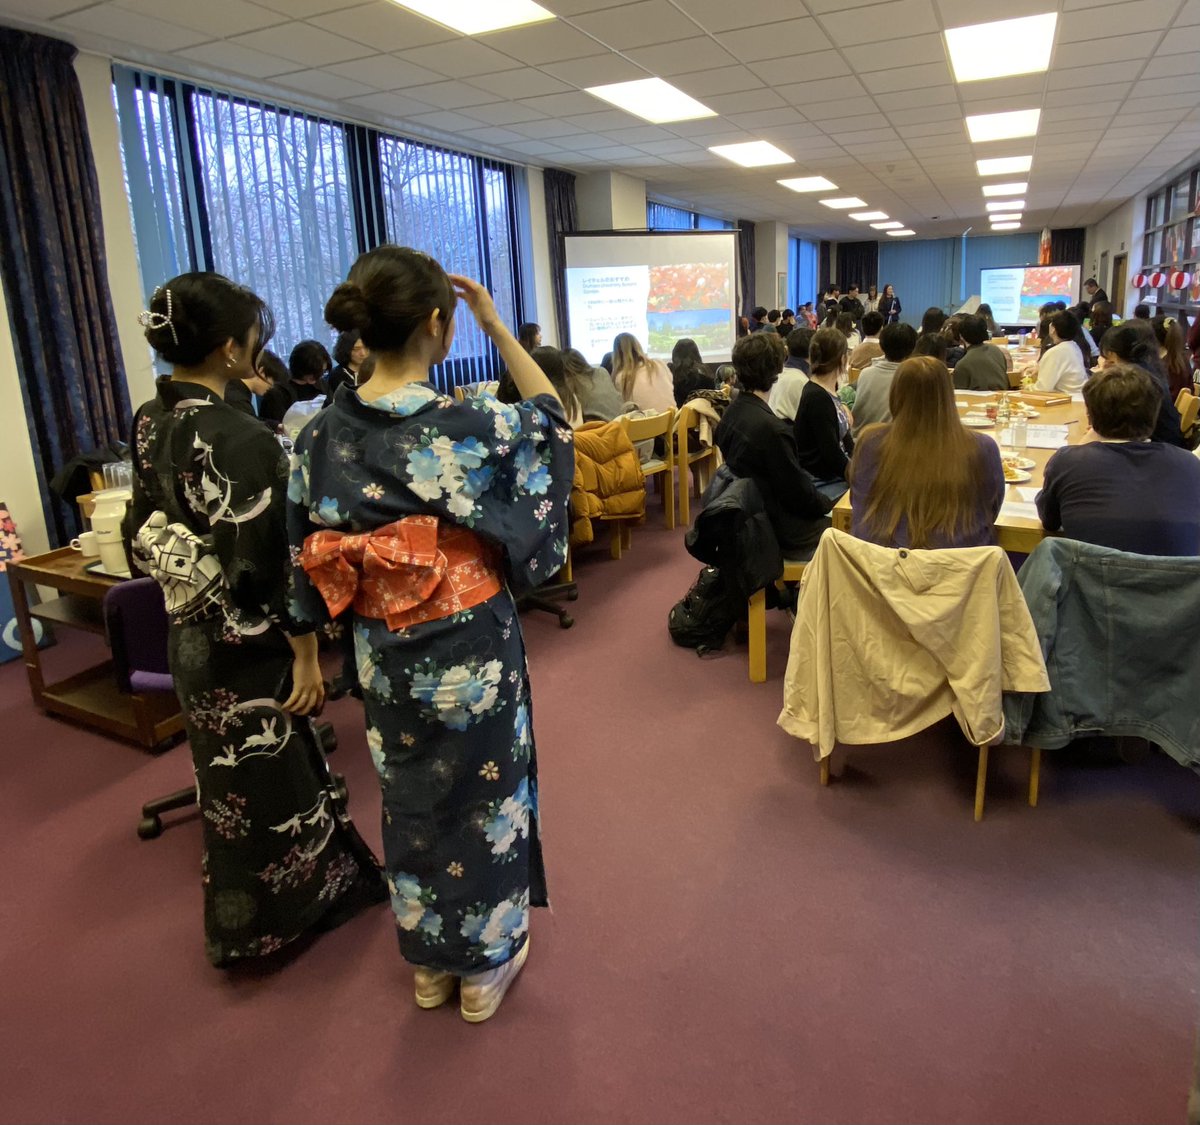 Fabulous day of events for #DUGlobalWeek. Advising study abroad students on language reqs, an intercultural communication workshop, and thanks to Teikyo University for hosting another packed @CFLS_Durham #Japanese event. We go again tmw!